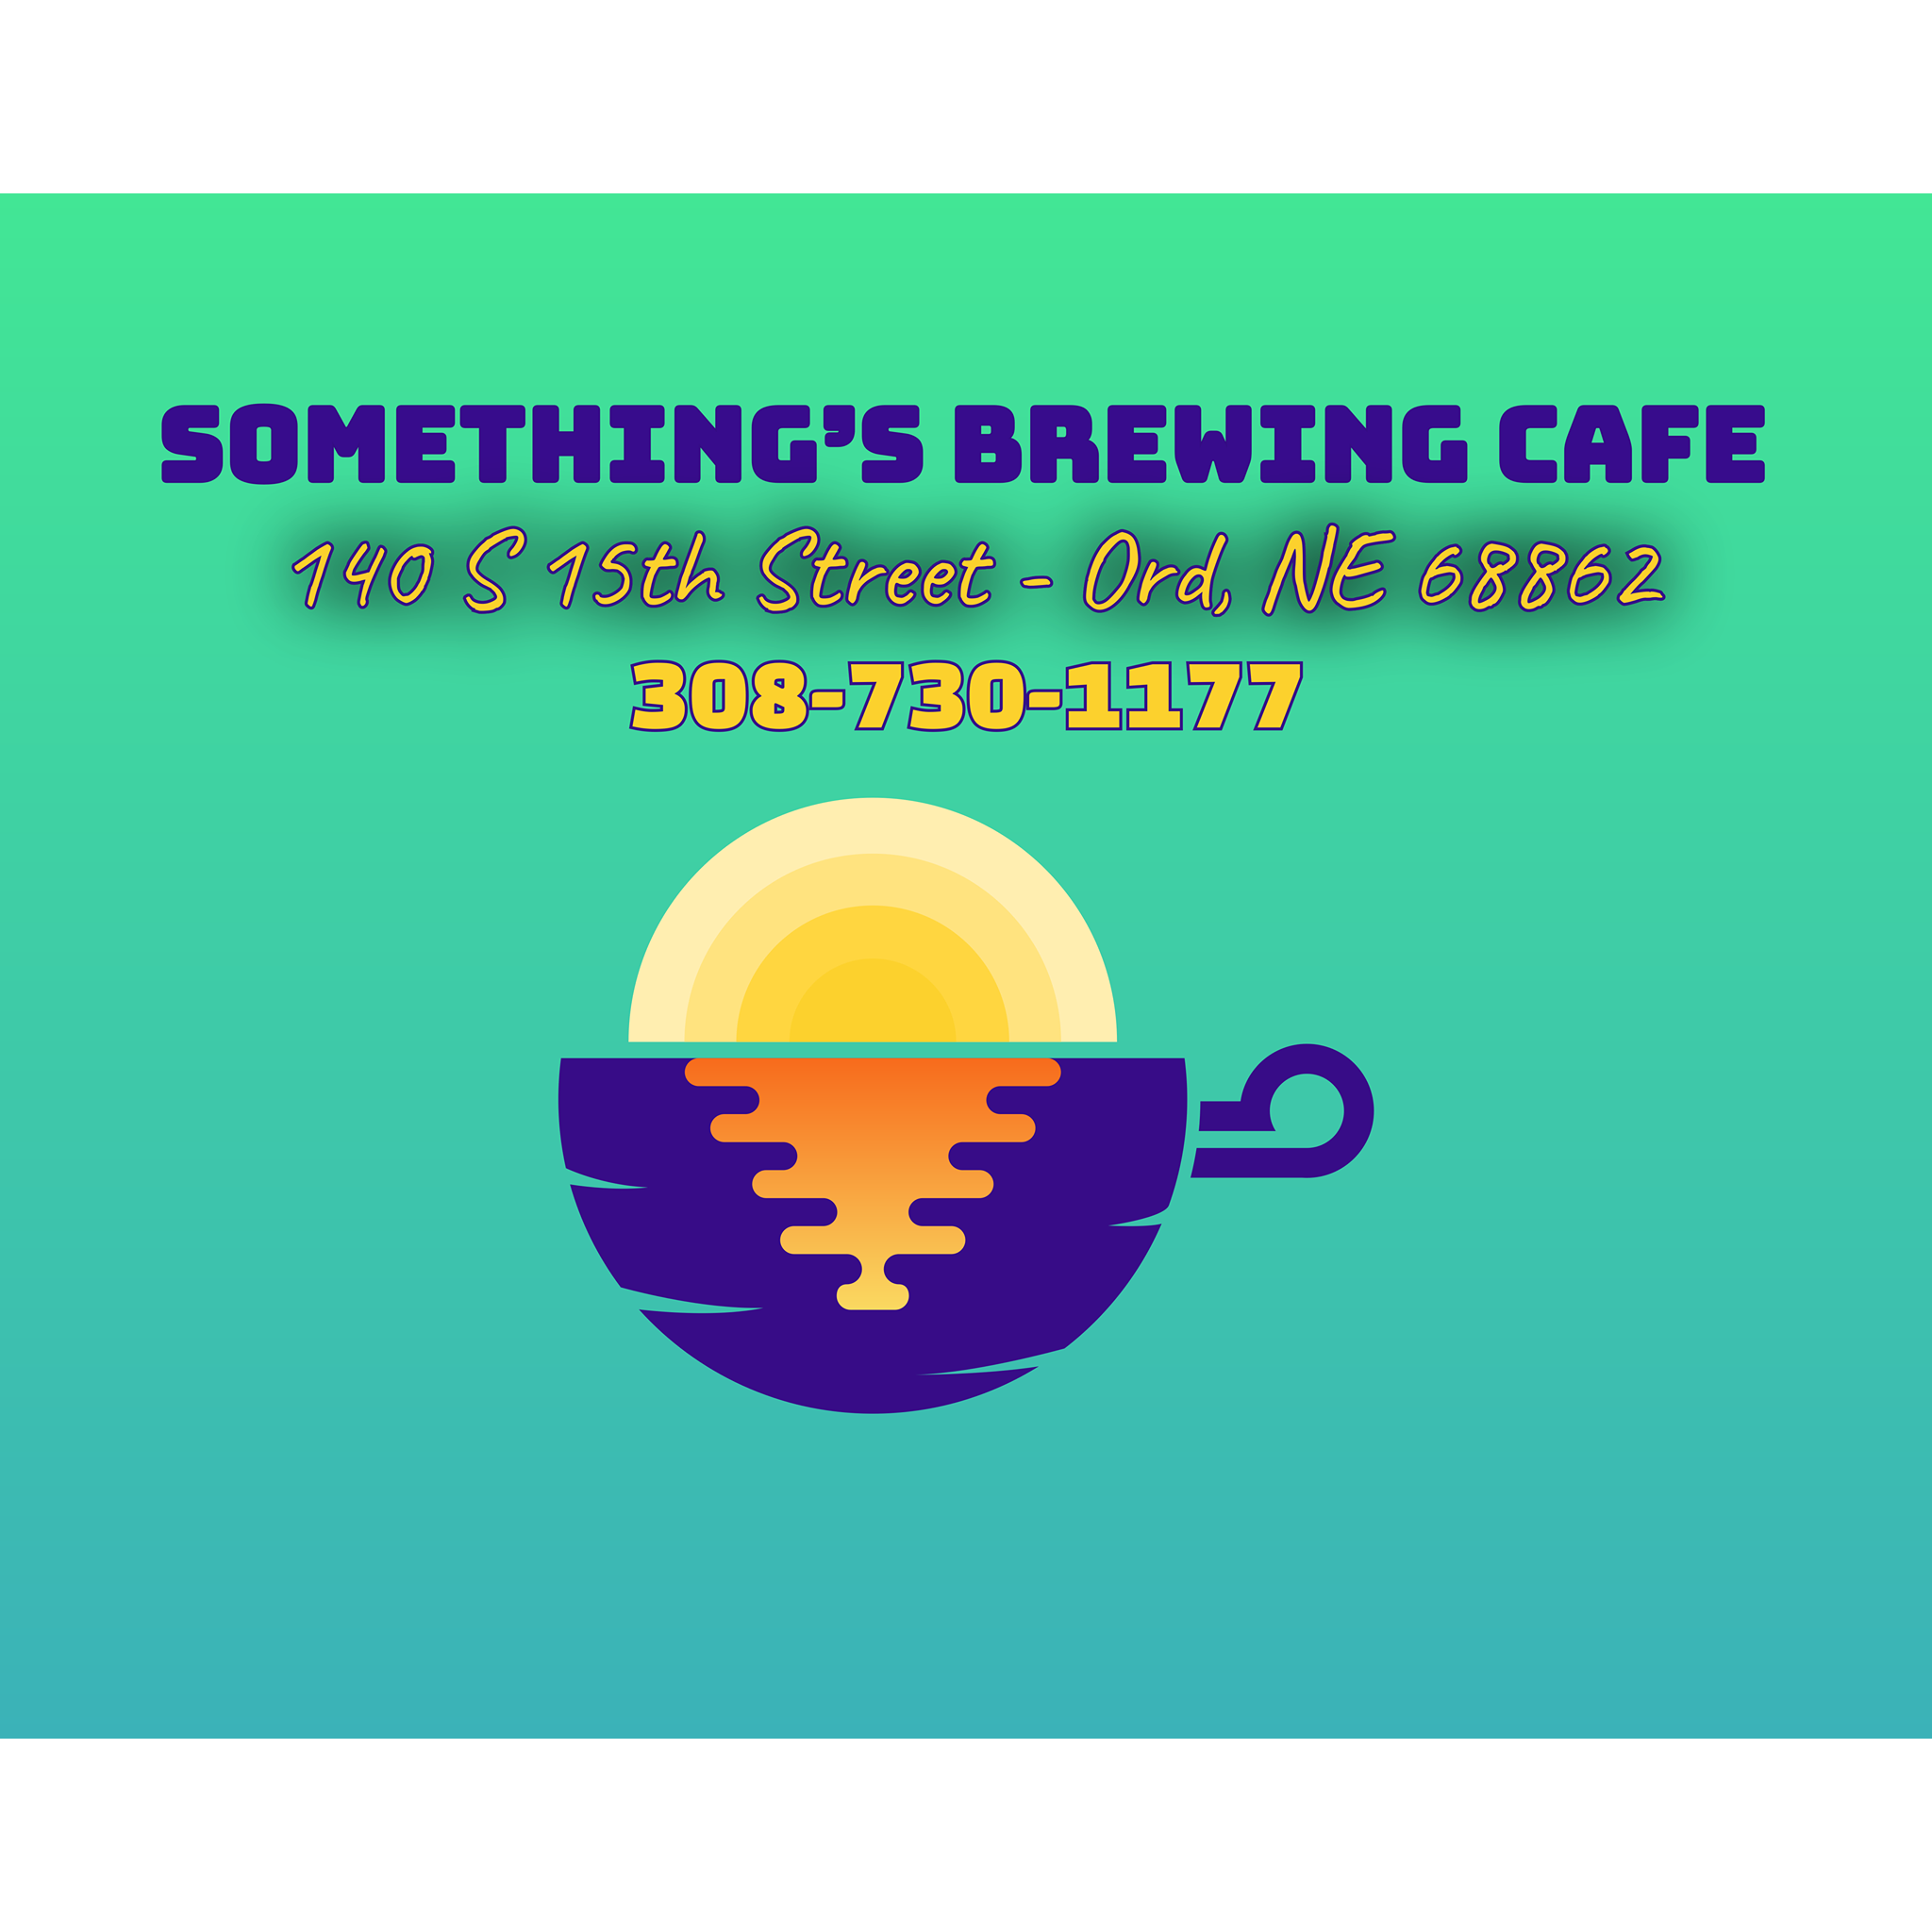 Something's Brewing Cafe Ord (308)730-1177